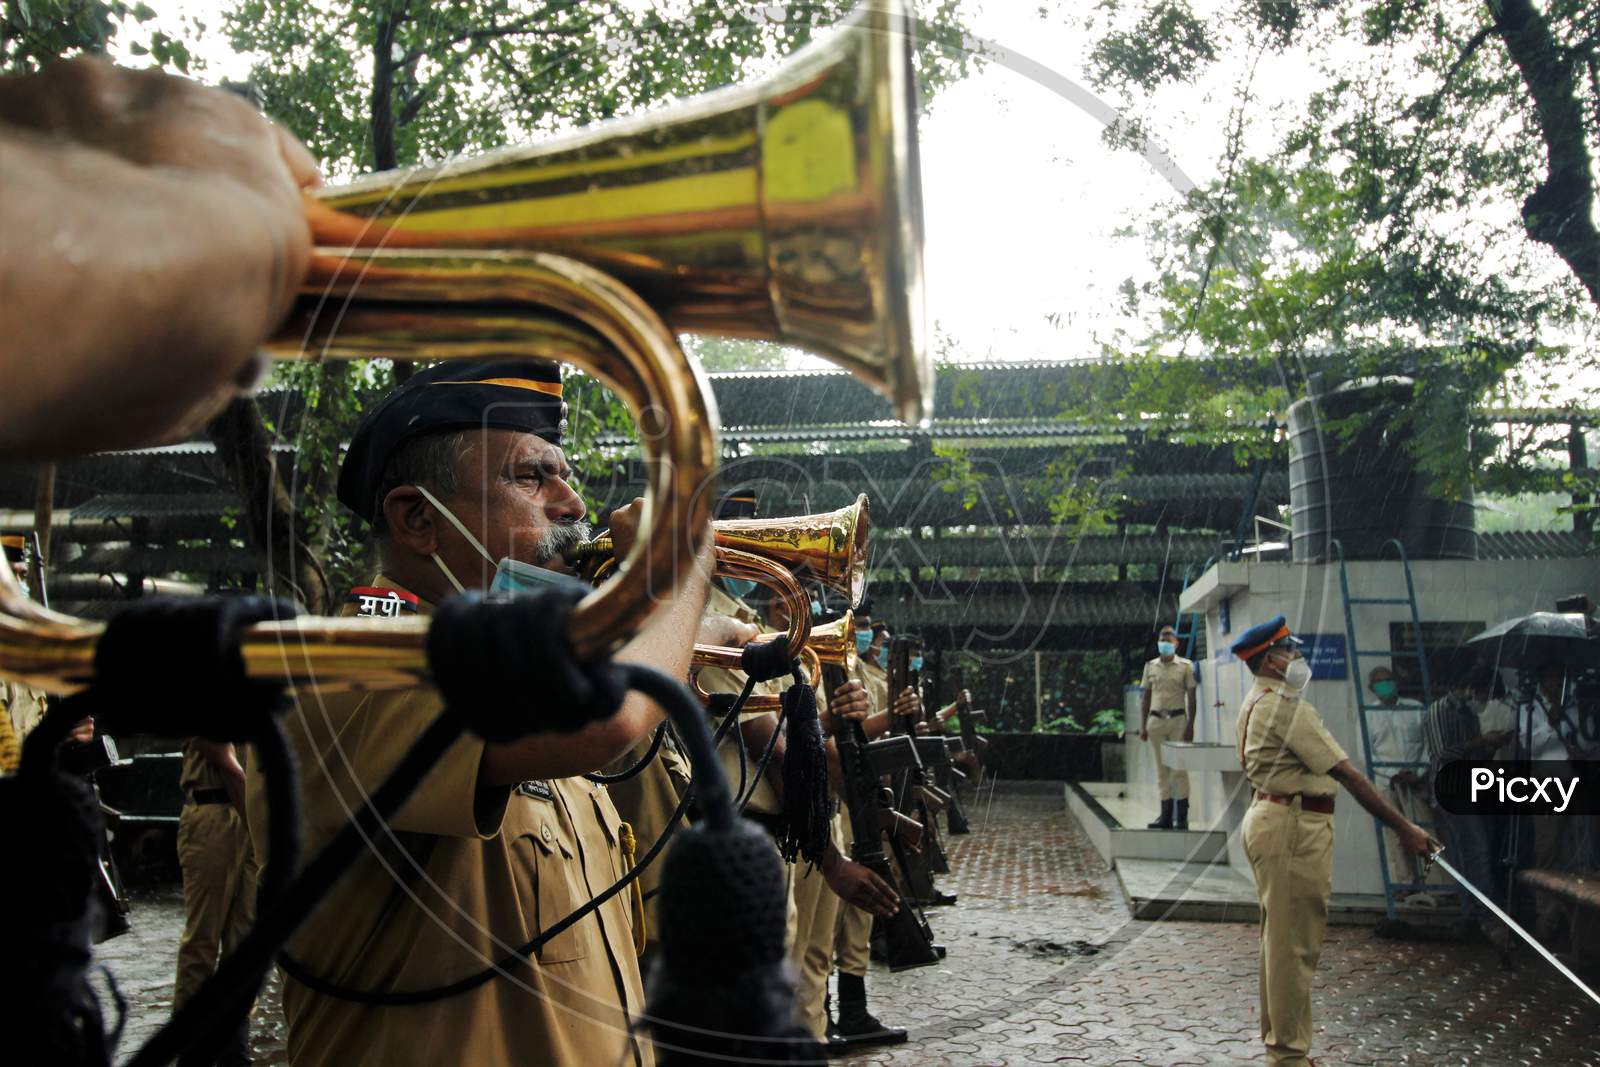 Police personnel pay tribute to deceased Air India pilot Deepak Sathe during his funeral in Mumbai, India on August 11, 2020.